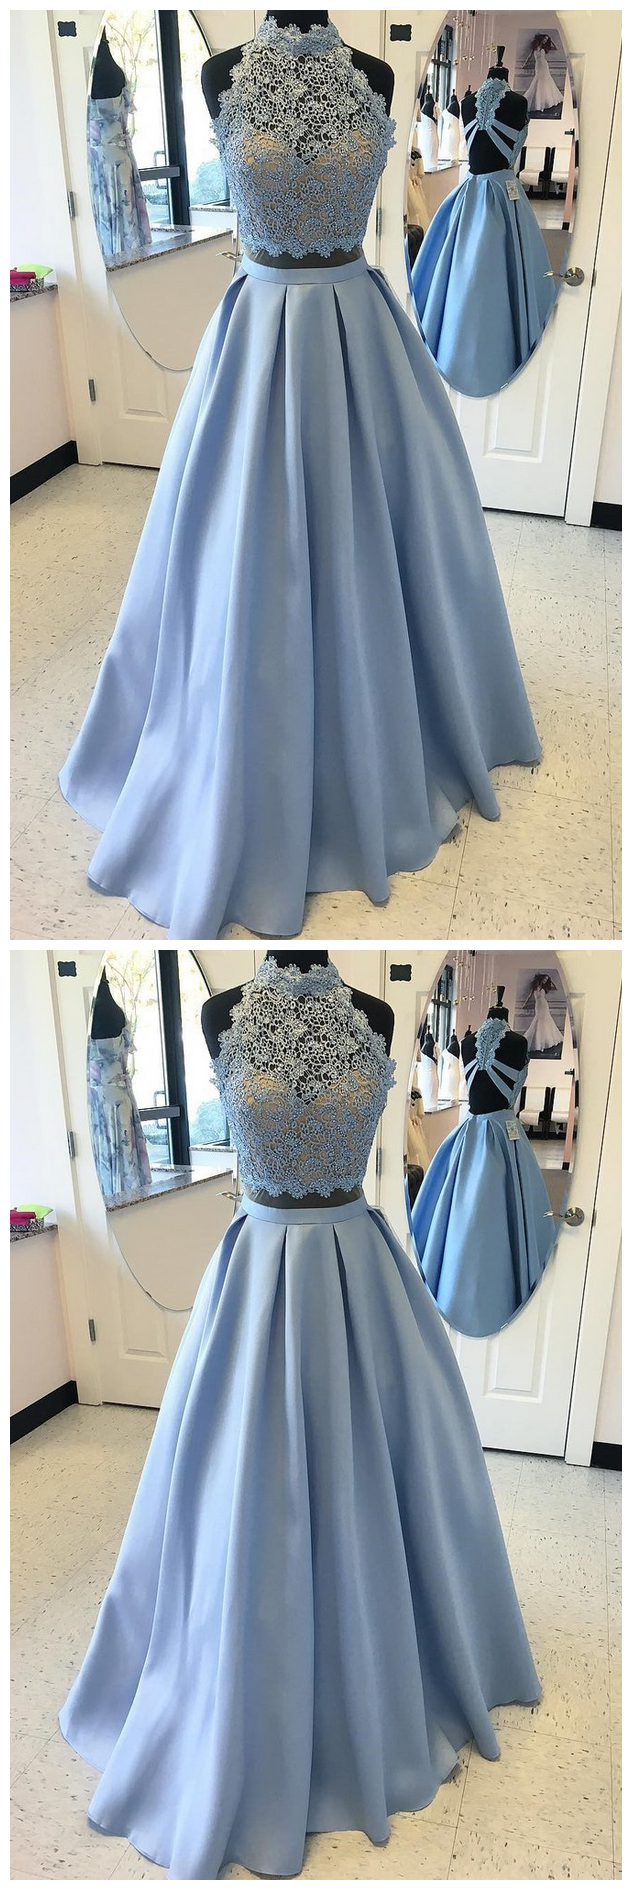 2 Piece Prom Dresses,high Neck Prom Gown, Prom Dress With Lace Top